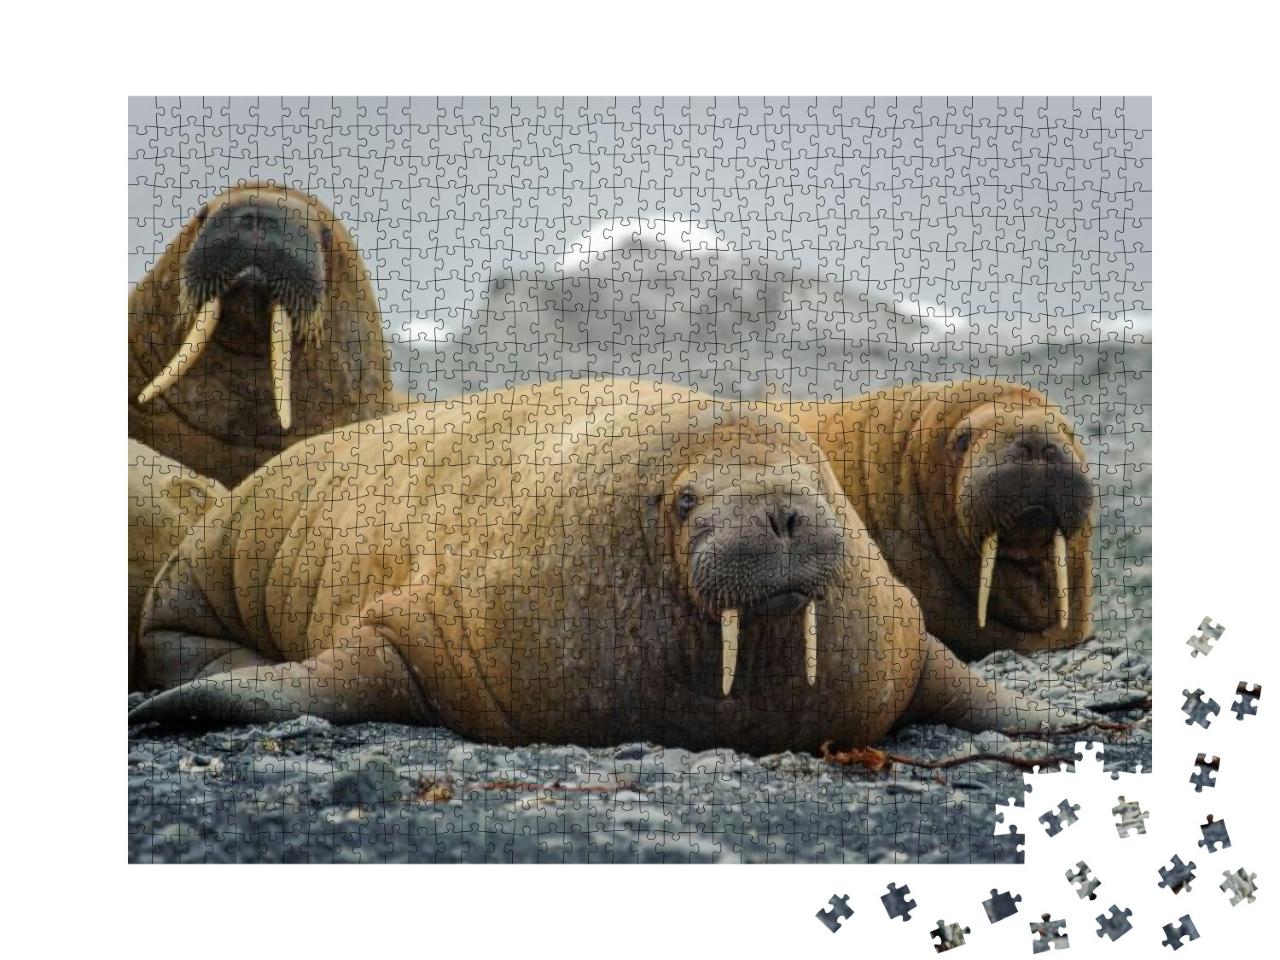 Walruses Lie on a Beach in the Arctic, on Franz Josef Lan... Jigsaw Puzzle with 1000 pieces